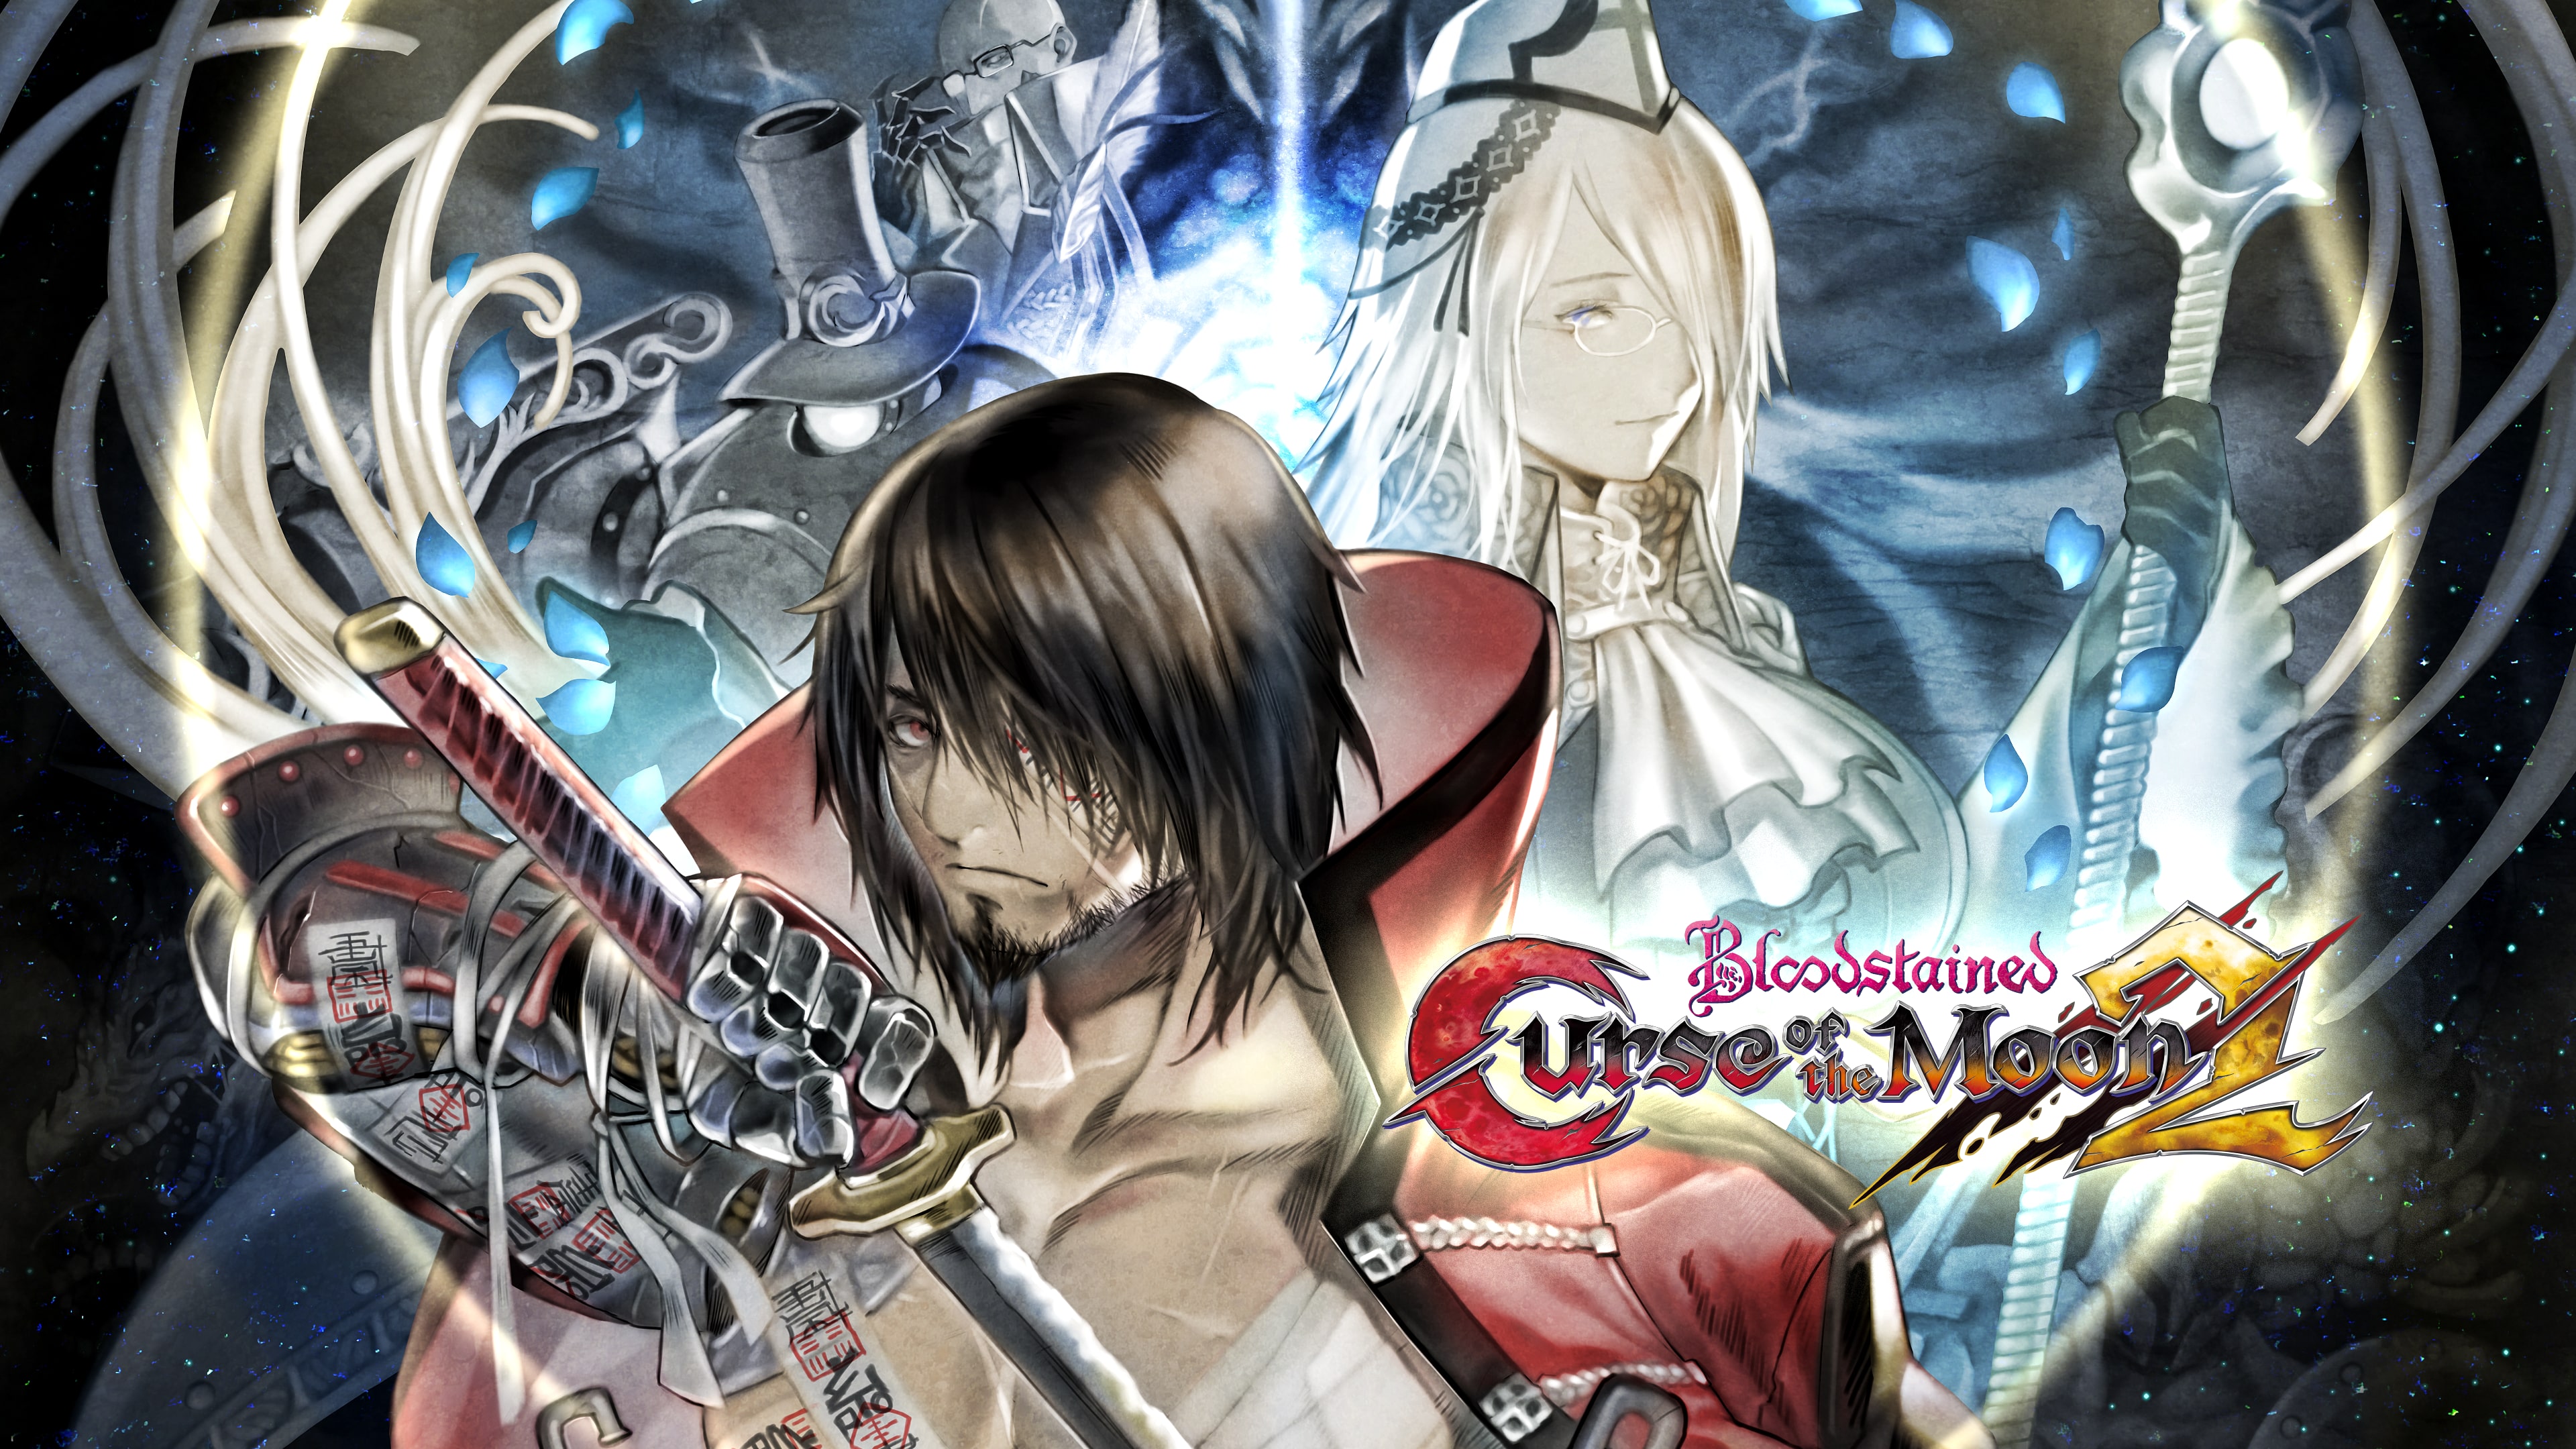 Bloodstained: Curse of the Moon 2 (英文, 日文)